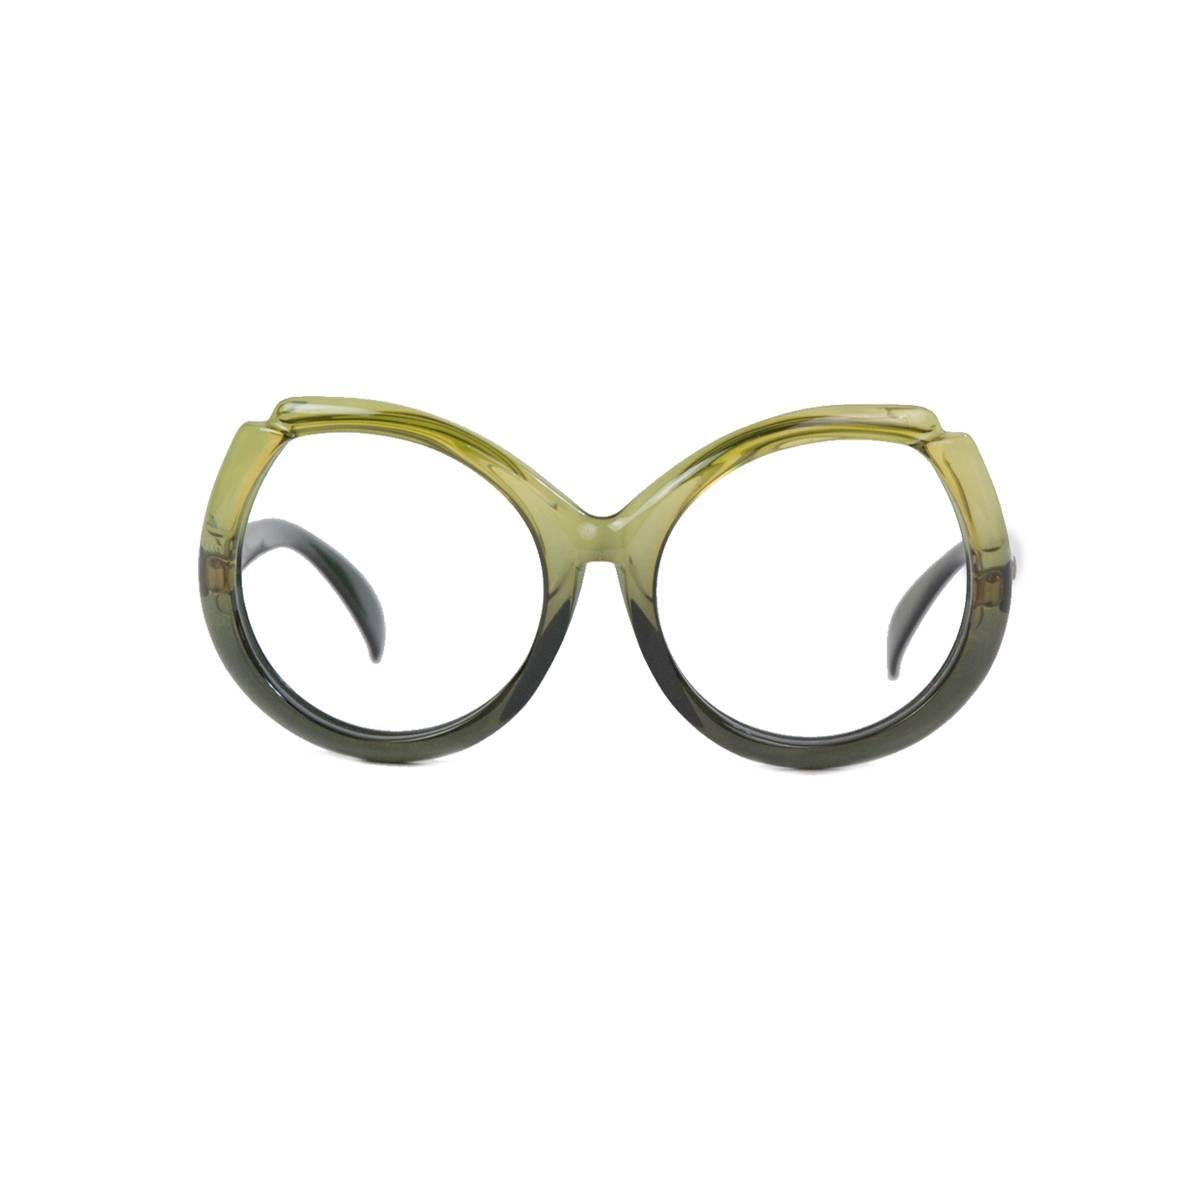 Rare and very beautiful eyewear frame by Christian Dior
Vintage from the 70s' 
Ultra light
Two shades of green, a dark one and a lighter 
Model 130 - 438
Every lenses can be adapted at necessity
Comes with a golden case, not the original one
